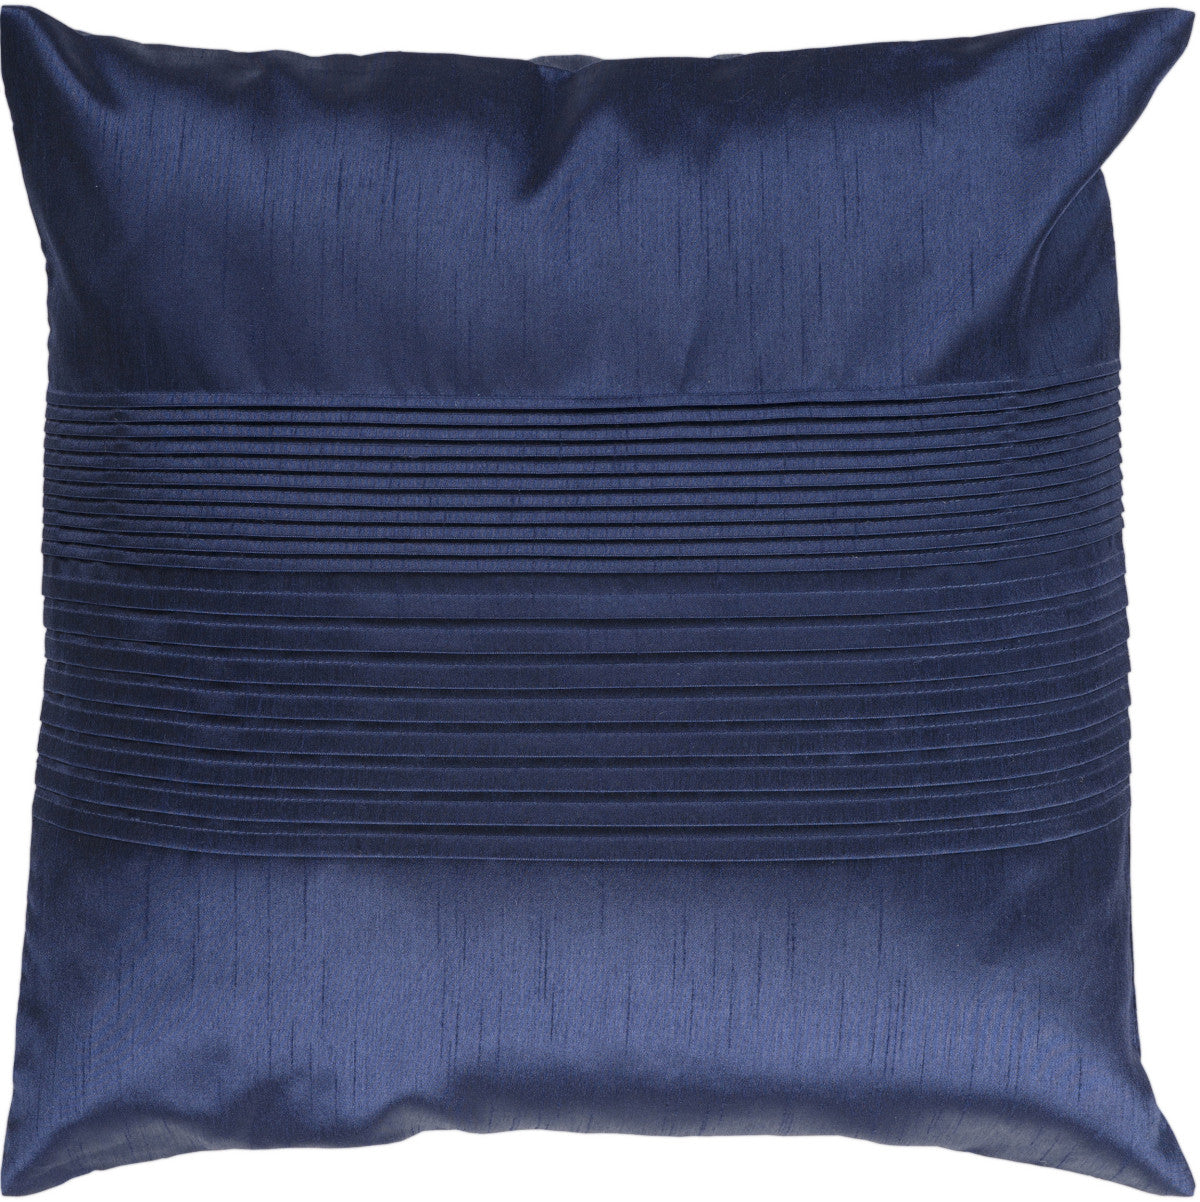 Surya Solid Pleated Lori Lee HH-029 Pillow